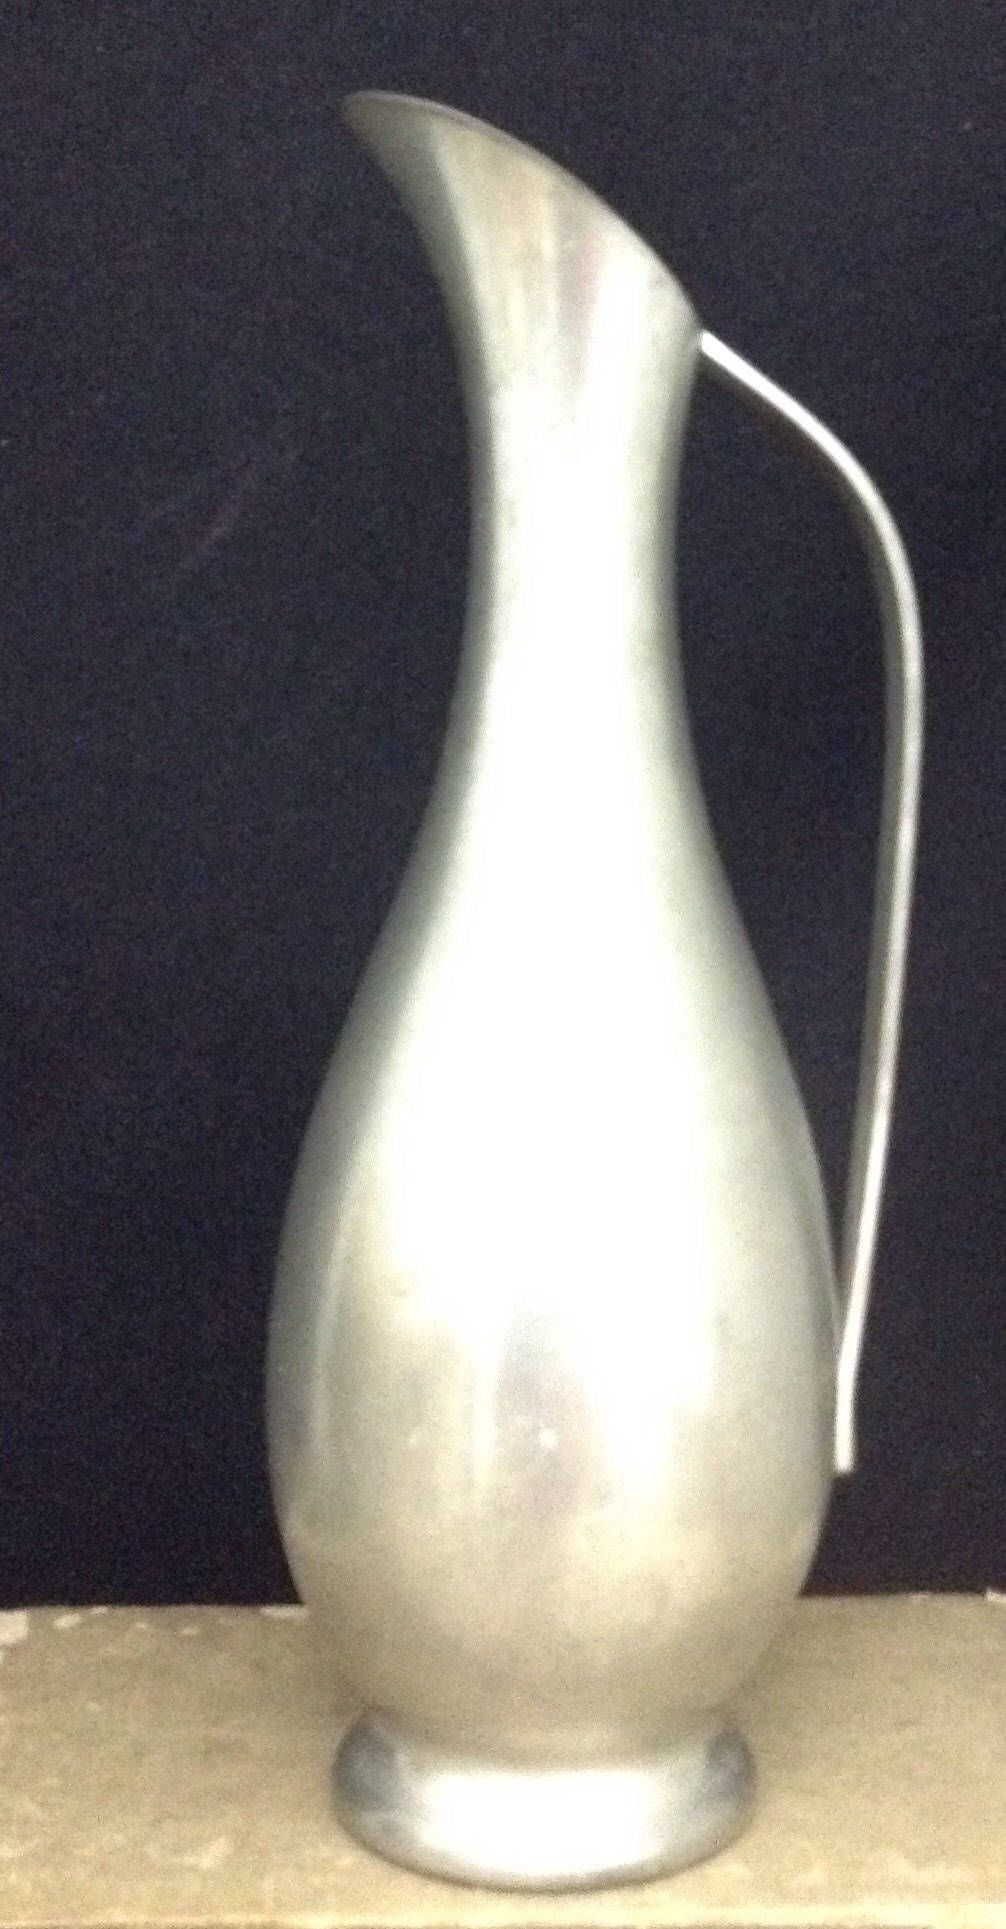 30 attractive Glass Pitcher Vase 2022 free download glass pitcher vase of metal pitcher vase photograph pewter pitcher pewter ewer pewter vase in metal pitcher vase photograph pewter pitcher pewter ewer pewter vase midcentury vase midcentury